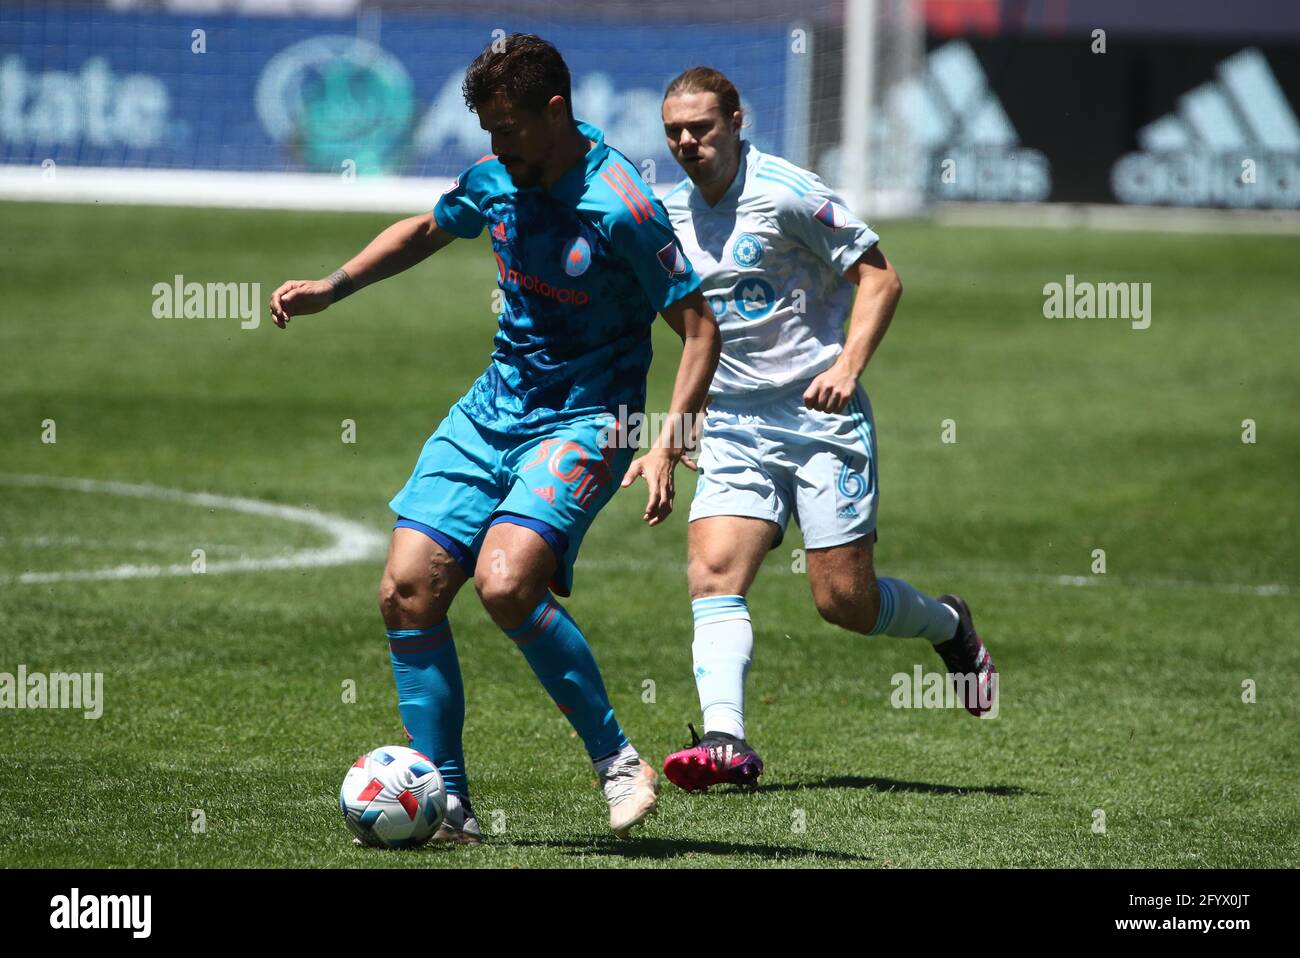 Chicago Fire FC midfielder Gaston Gimenez (30) dribbles the ball during a MLS match against the CF Montréal at Soldier Field, Saturday, May 29, 2021, Stock Photo